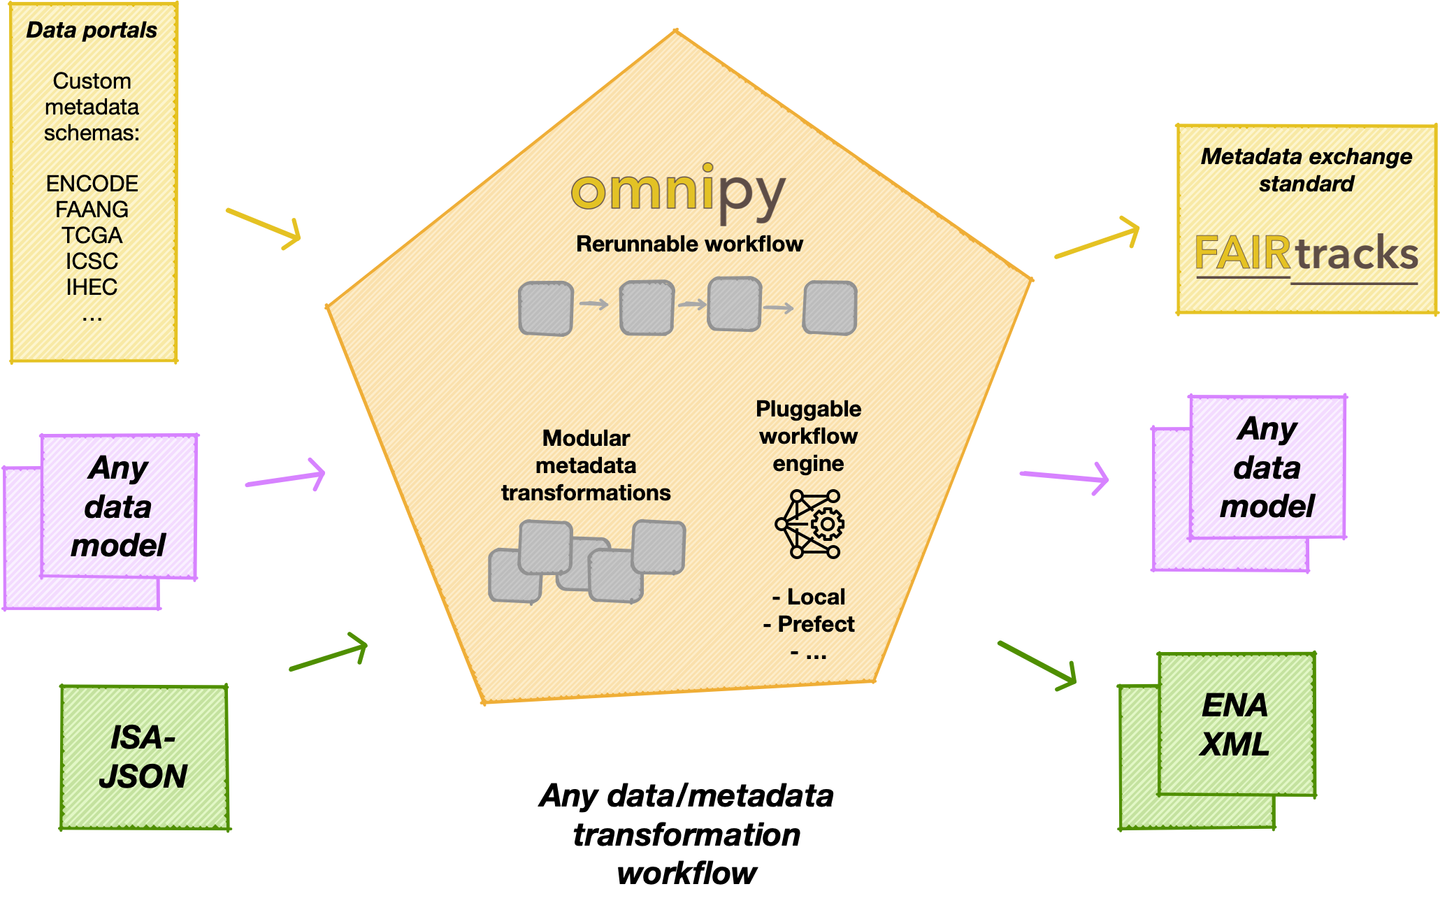 Conceptual overview of Omnipy